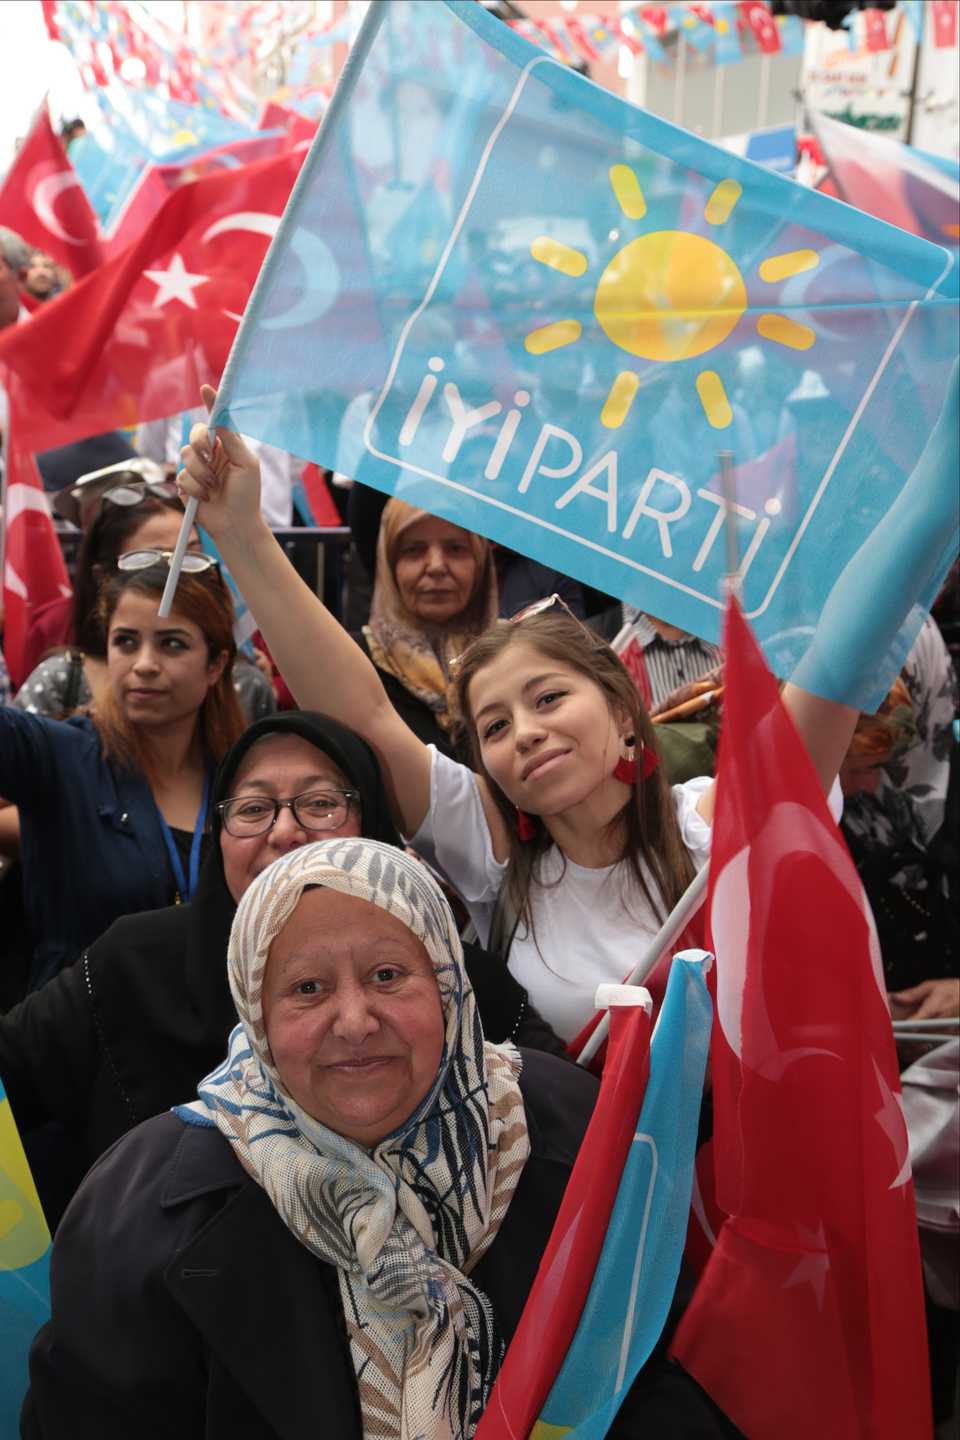 Established in 2017, Iyi (Good) Party is the newest party running in the 2018 elections. Its leader, Meral Aksener, is the only female contender in the presidential election.